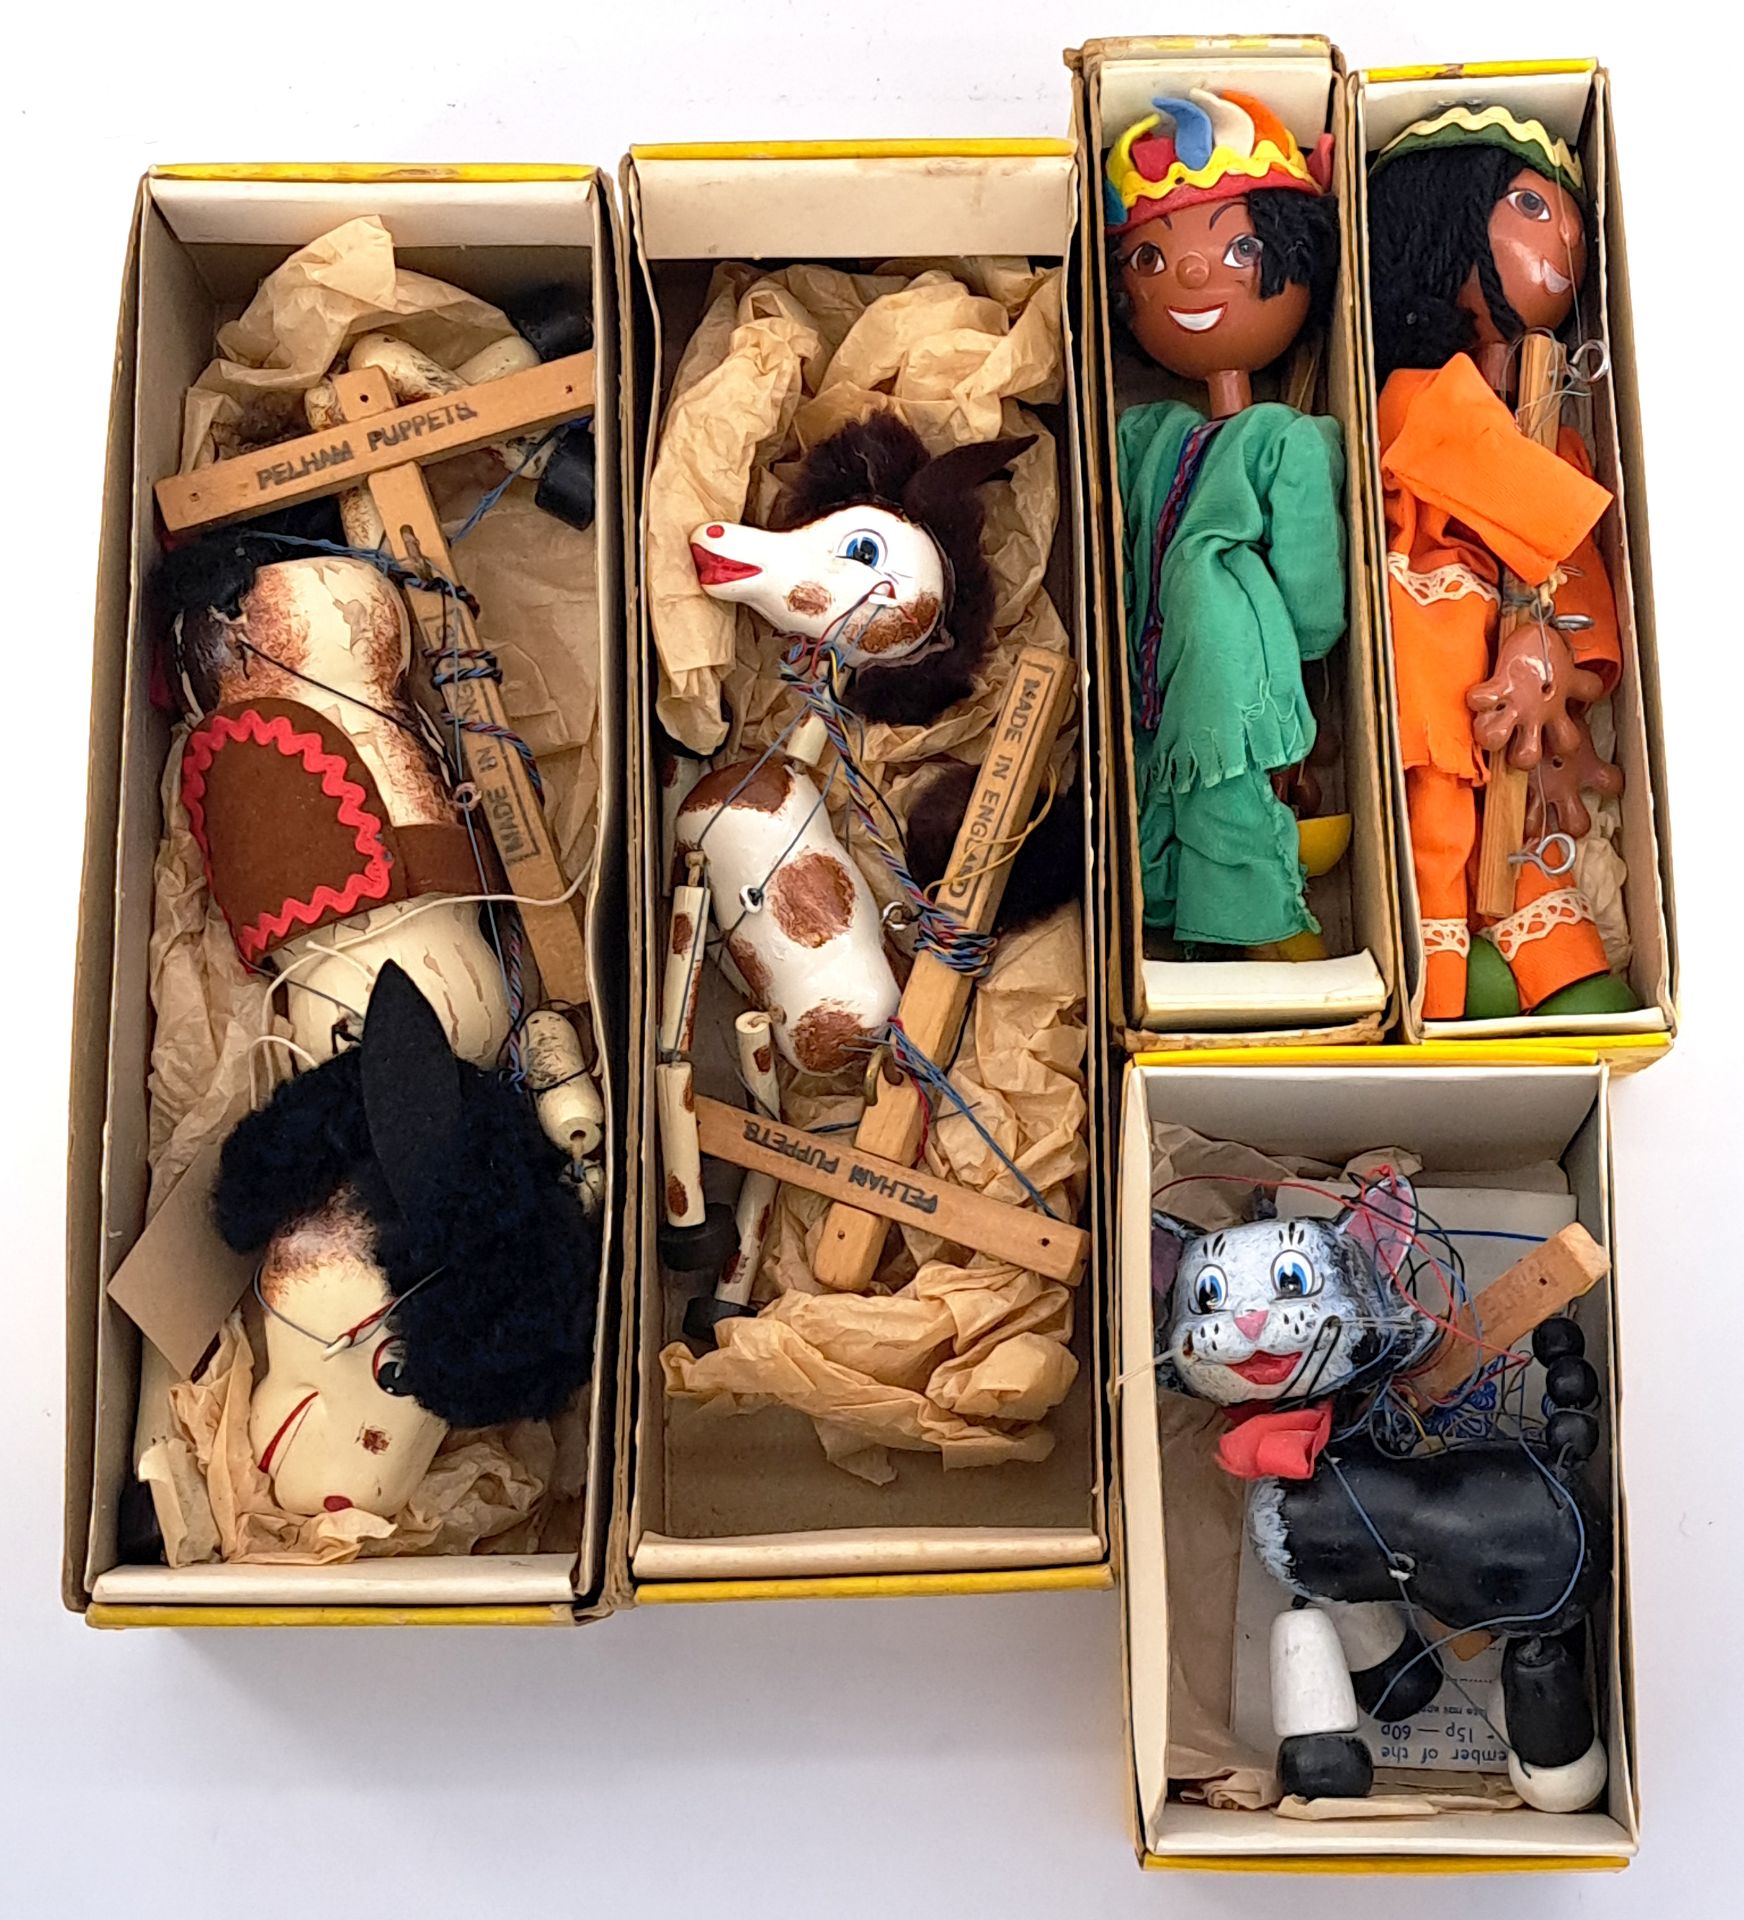 Collection of five Pelham Puppets